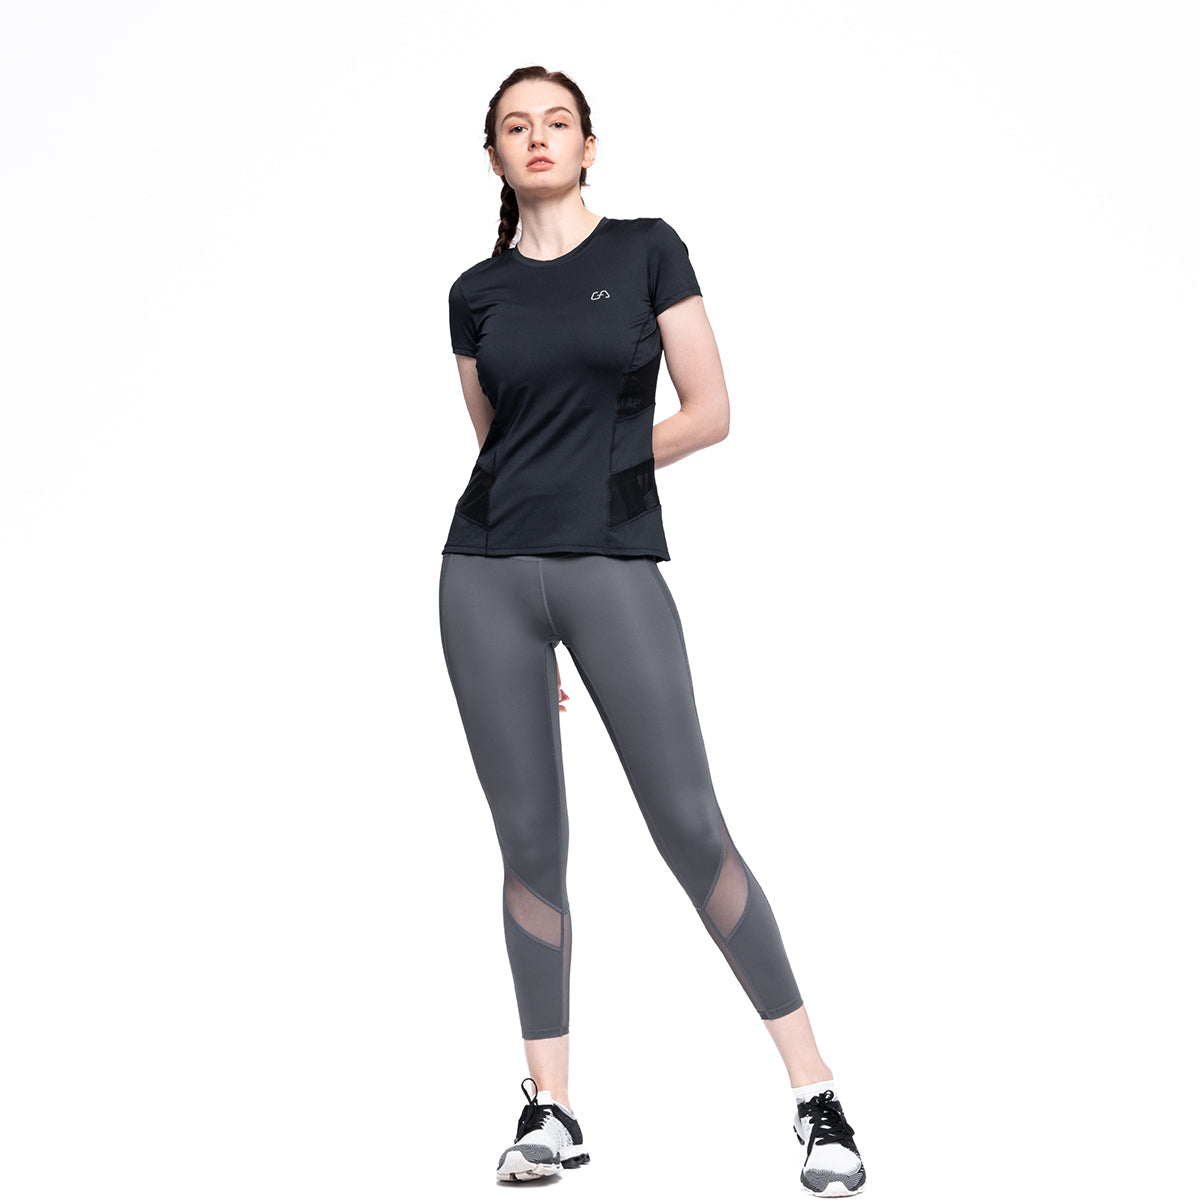 Women's Sportswear & Activewear, Gym & Fitness Clothes